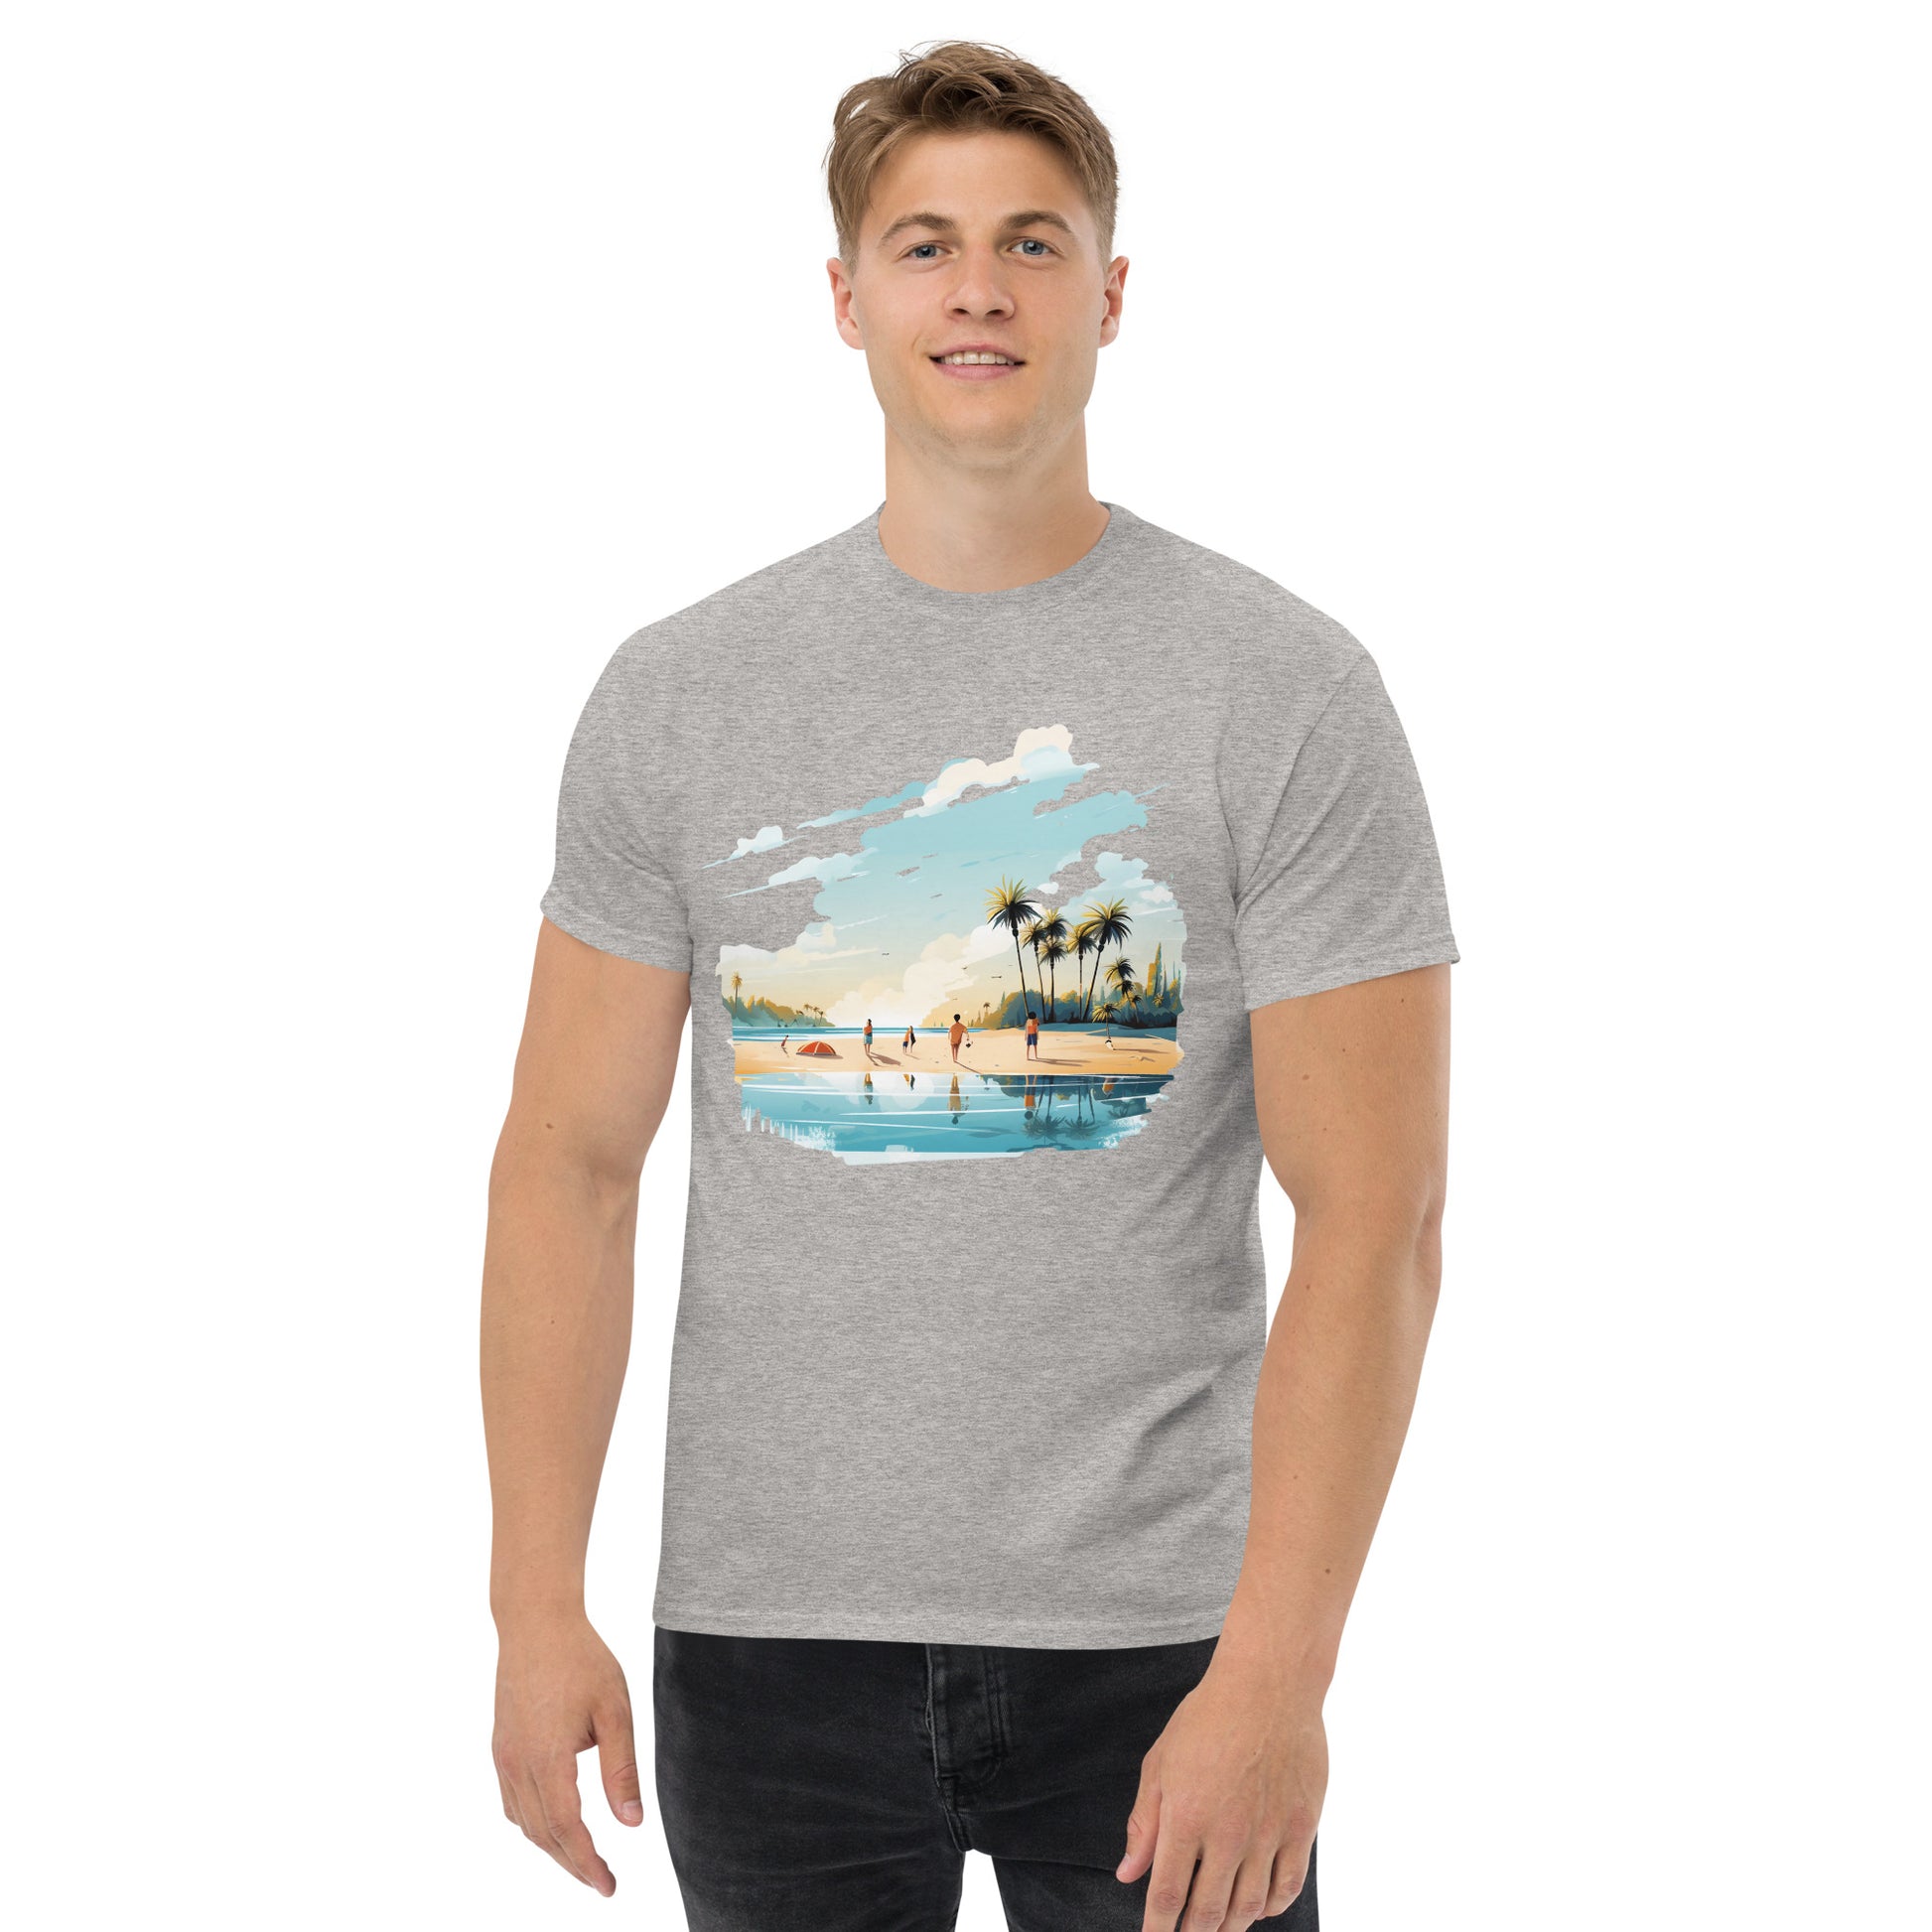 Men with sport grey T-shirt and a picture of a island with sea and sand